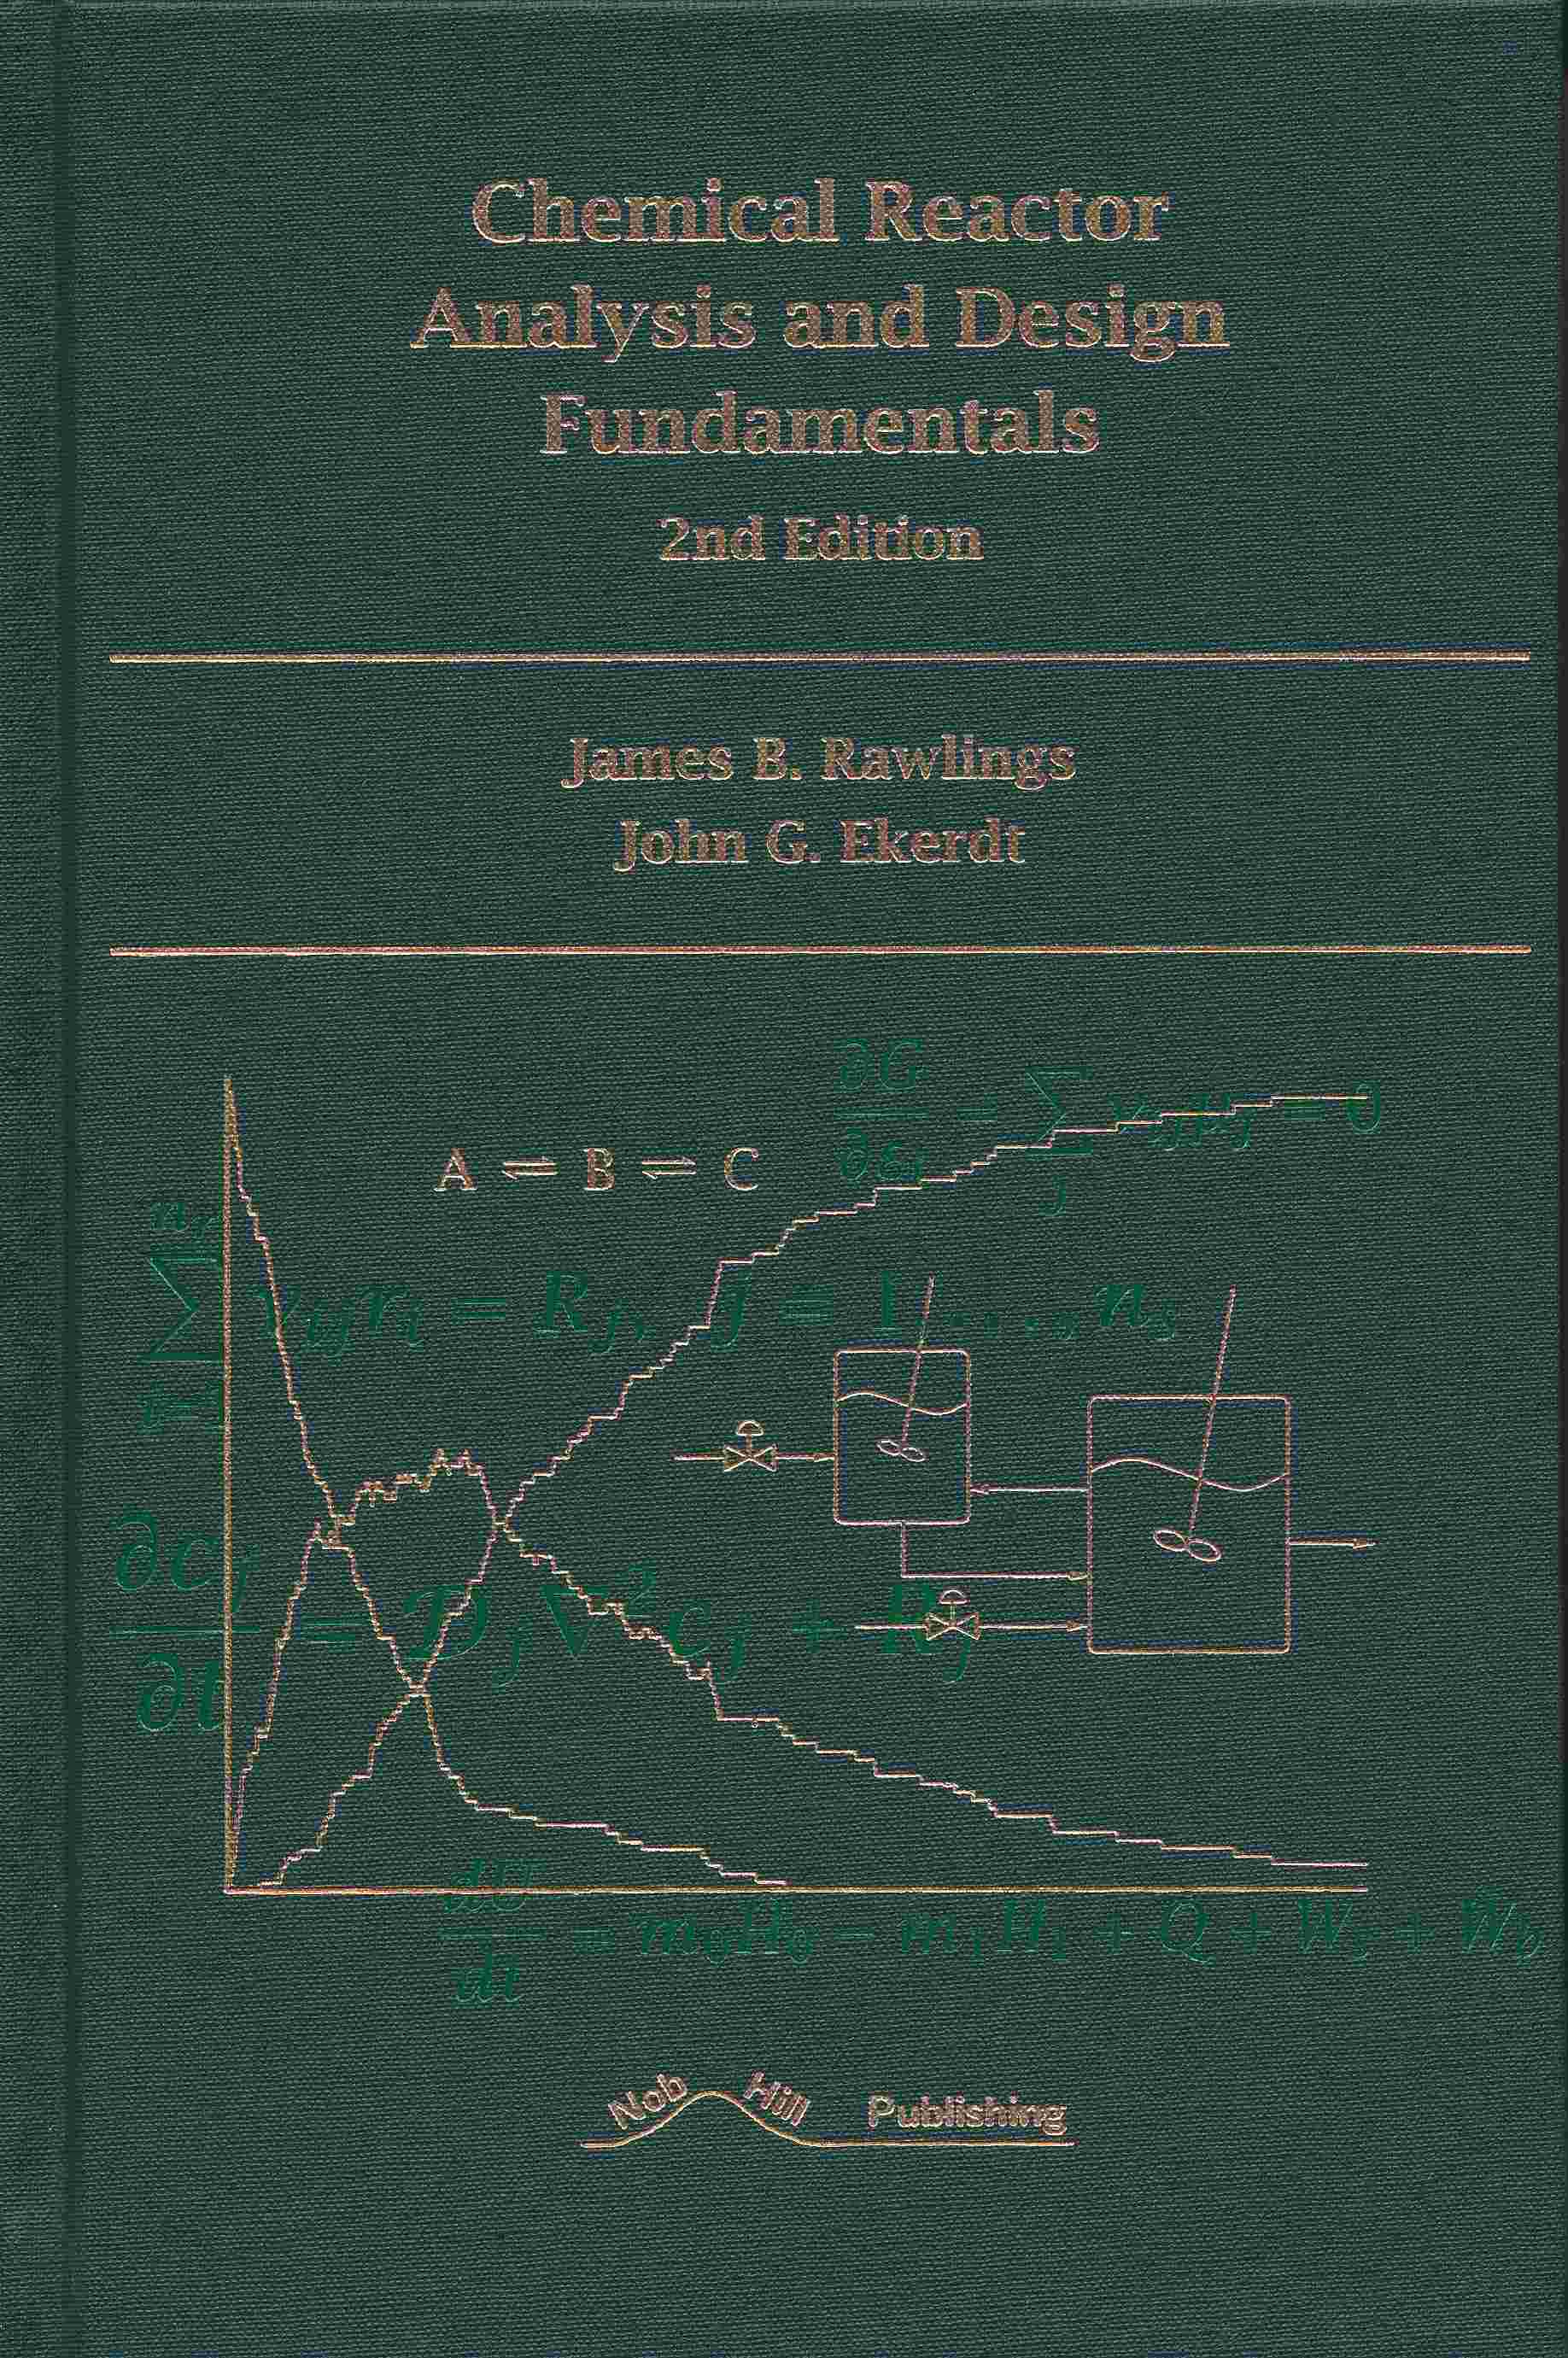 Chemical Reactor Analysis and Design Fundamentals 2nd Edition